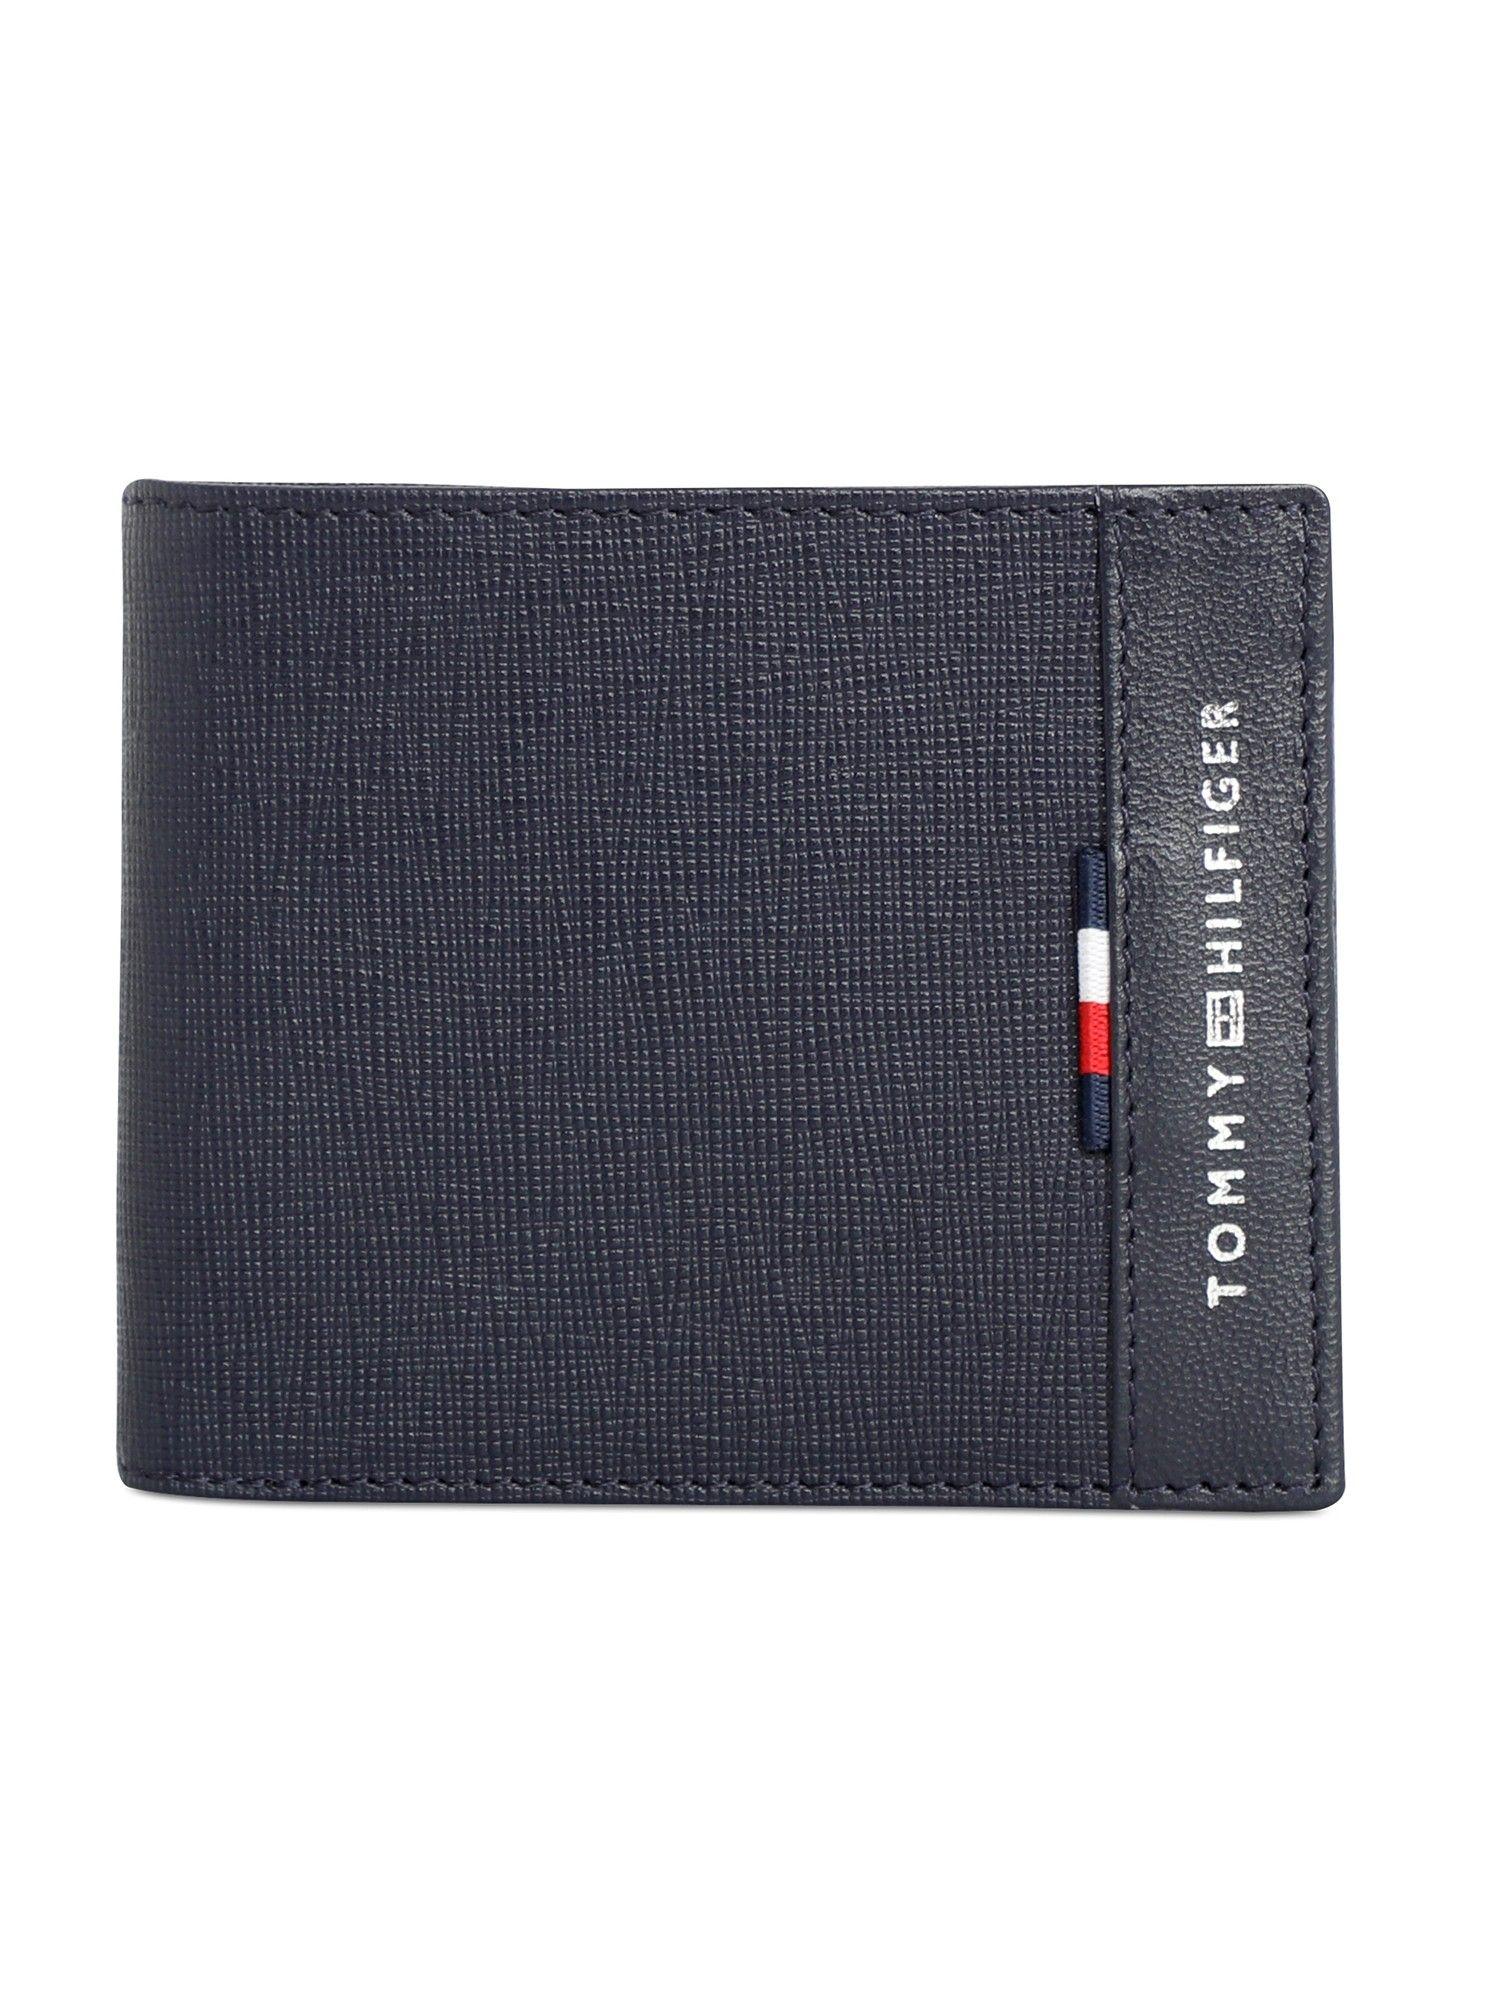 carmine mens leather global coin wallet textured navy